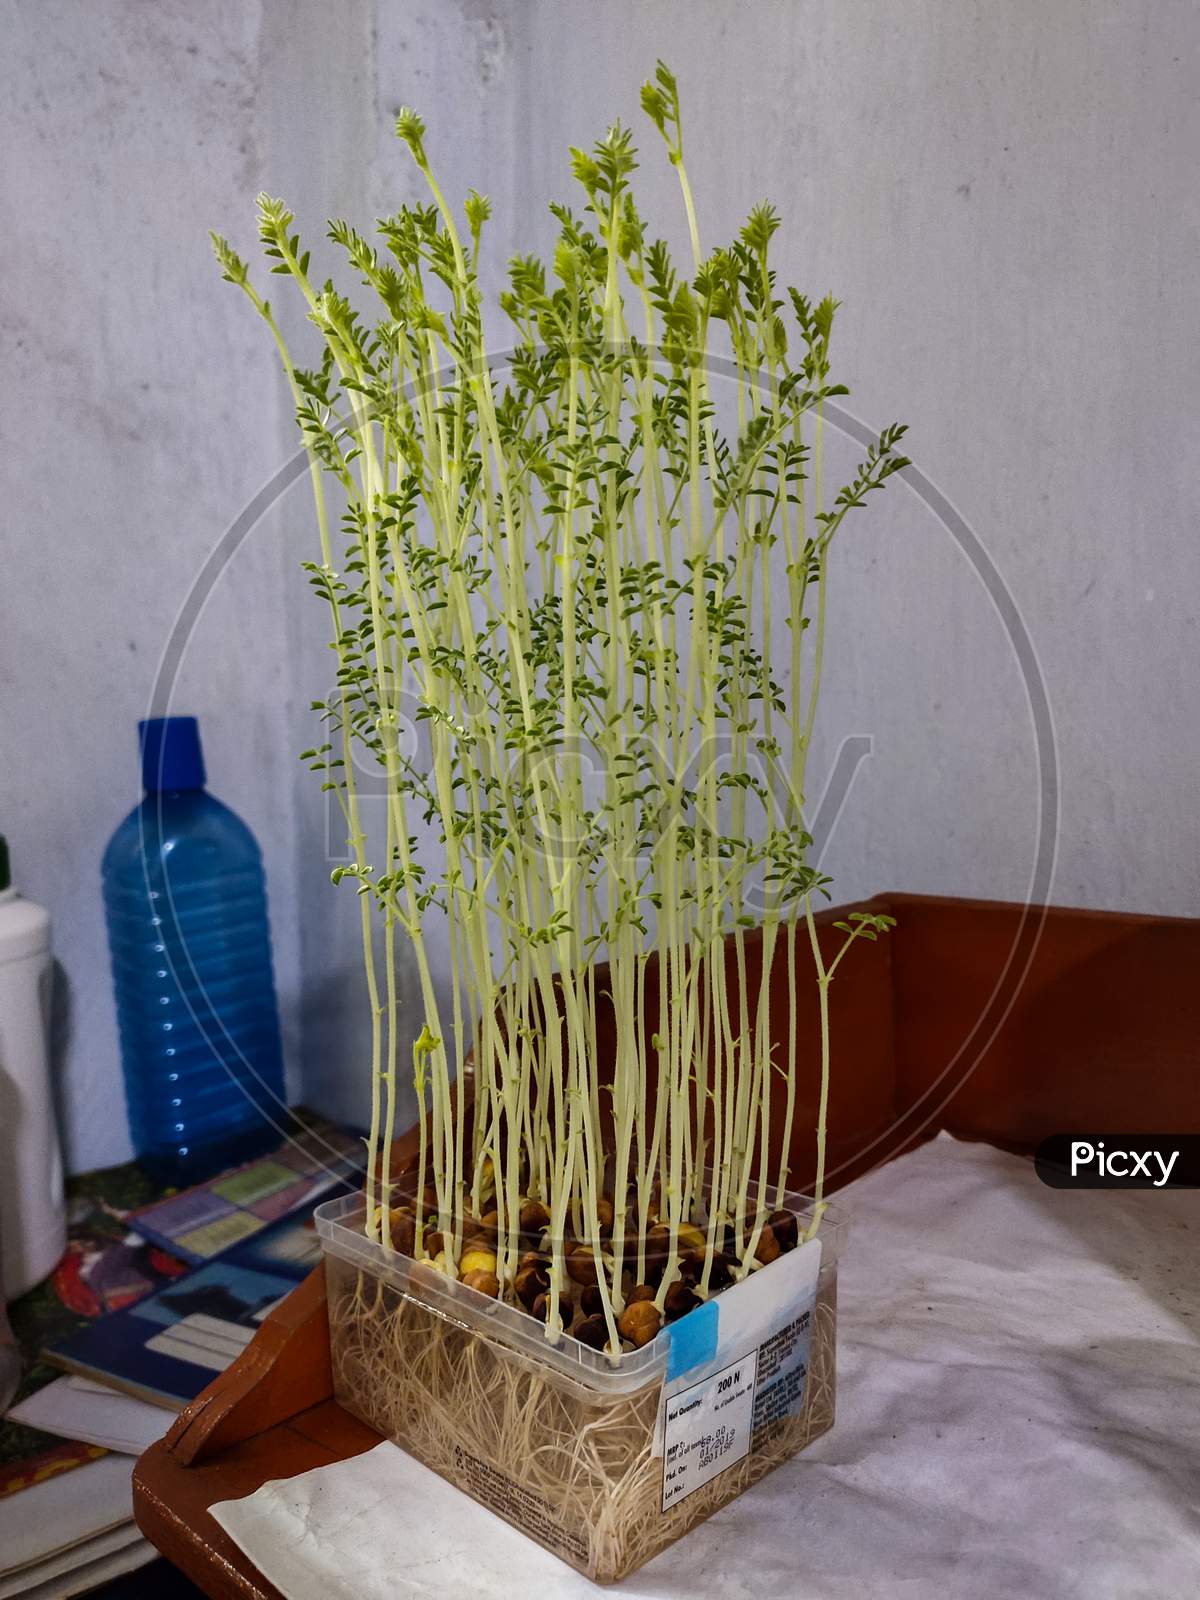 Chickpea Plants Growing On A Transparent Plastic Box By Hydroponic System In The Room. Plants Grown Only In Water, Without Soil And Minimal Sunlight